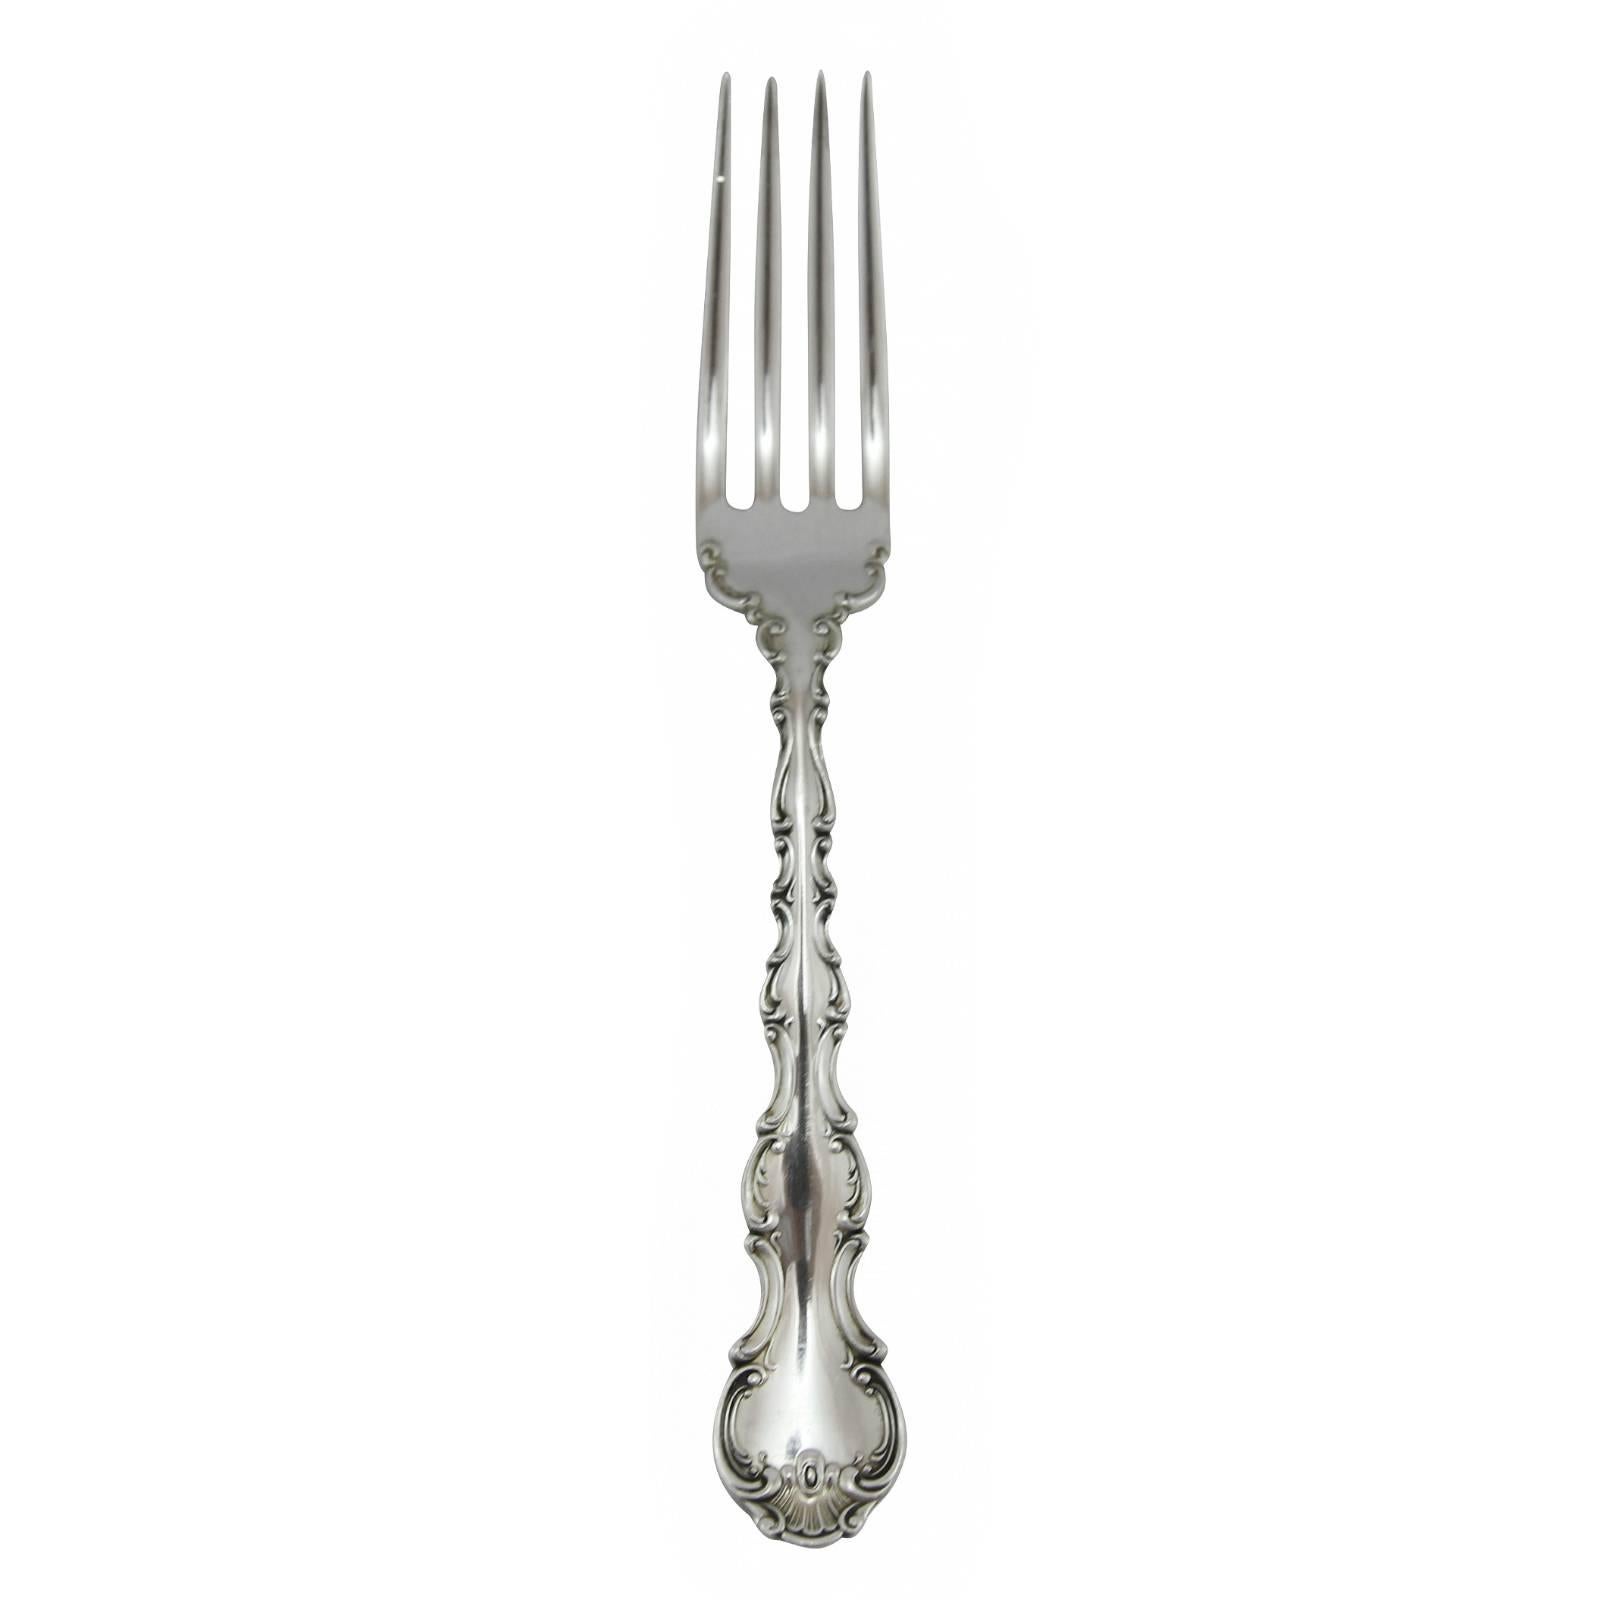 Rhode Island, United States. 77 Piece total, for a 6 piece setting for 12. First Produced 1897.

12 Dinner Knives, 12 Dinner Forks, 12 Tea Spoons, 12 Soup Spoons, 12 Butter Knives, 12 Salad Knives, 1 Baby Spoon/Tea Caddy, 1 Bon Bon Spoon, 1 Pickle